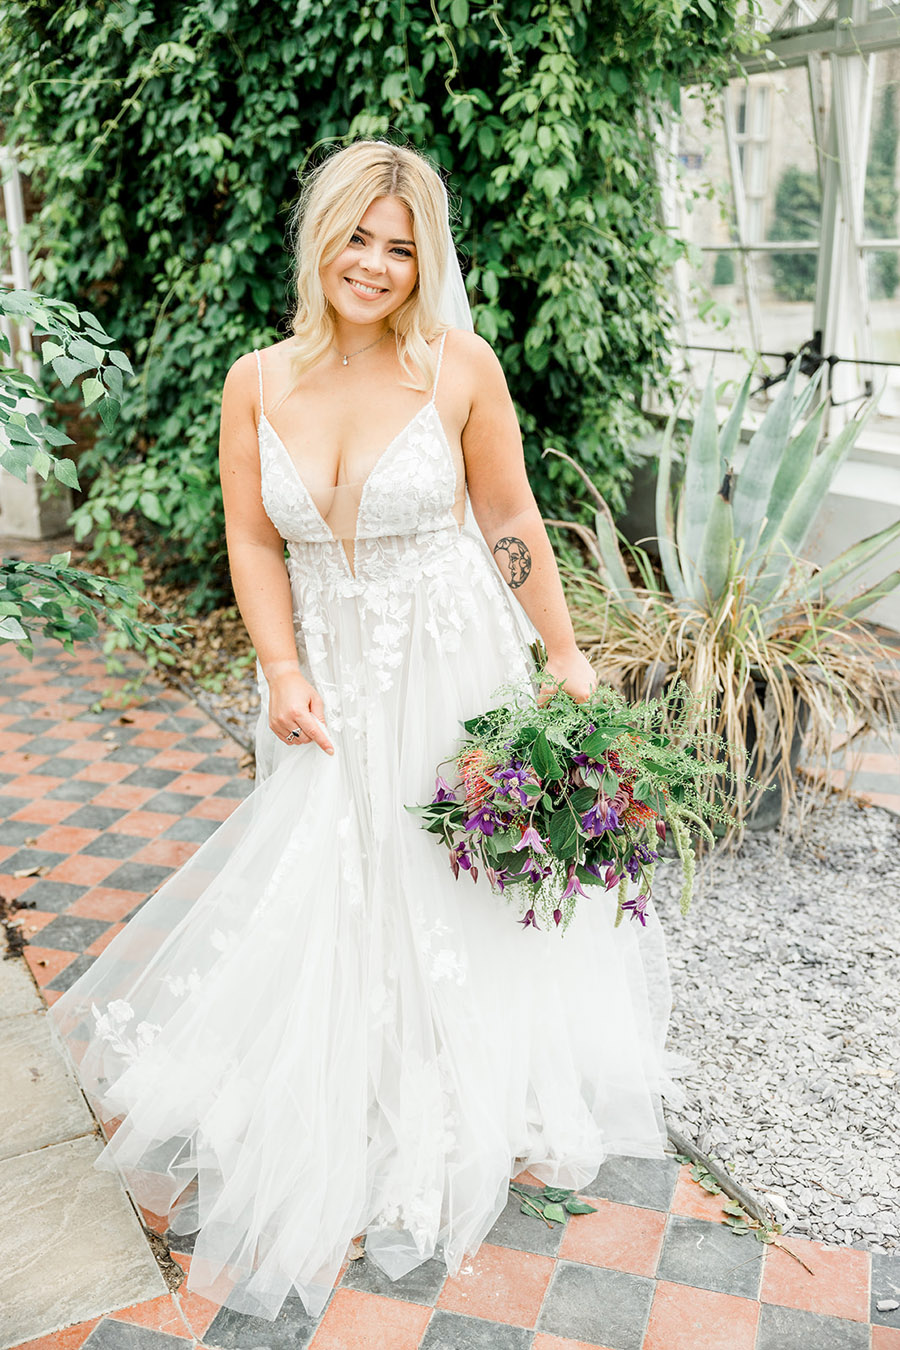 Modern intimate wedding styling inspiration from Slindon House, image credit Kelsie Scully (3)